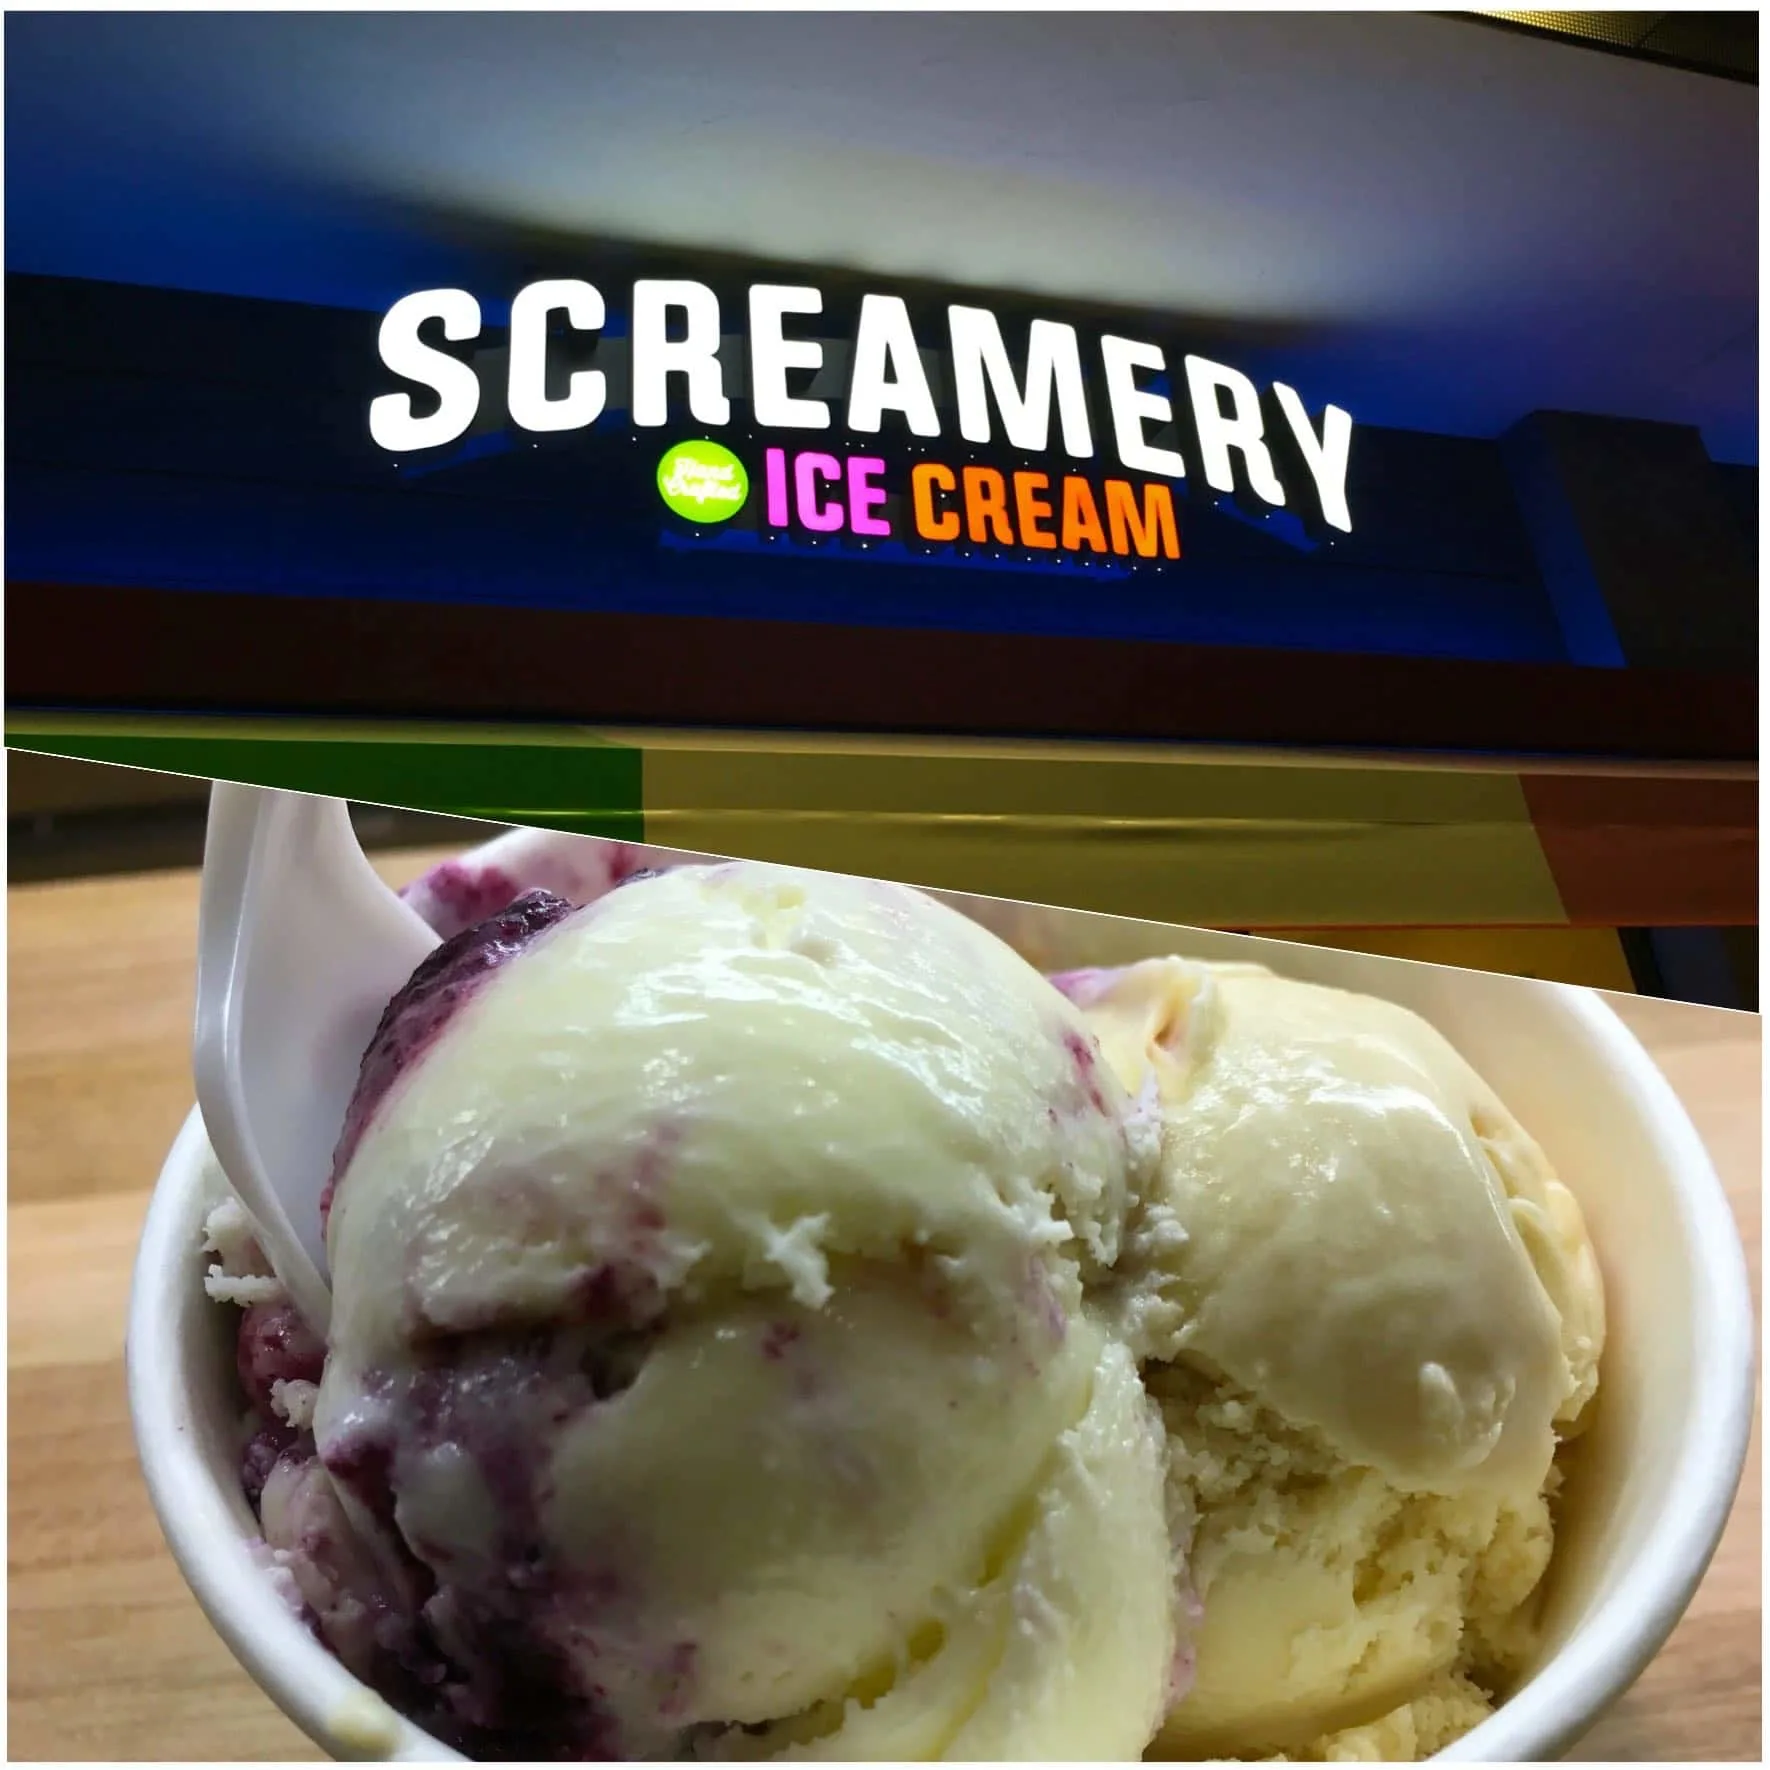 The Screamery in Tucson is delicious old-fashioned ice cream with modern flavors.